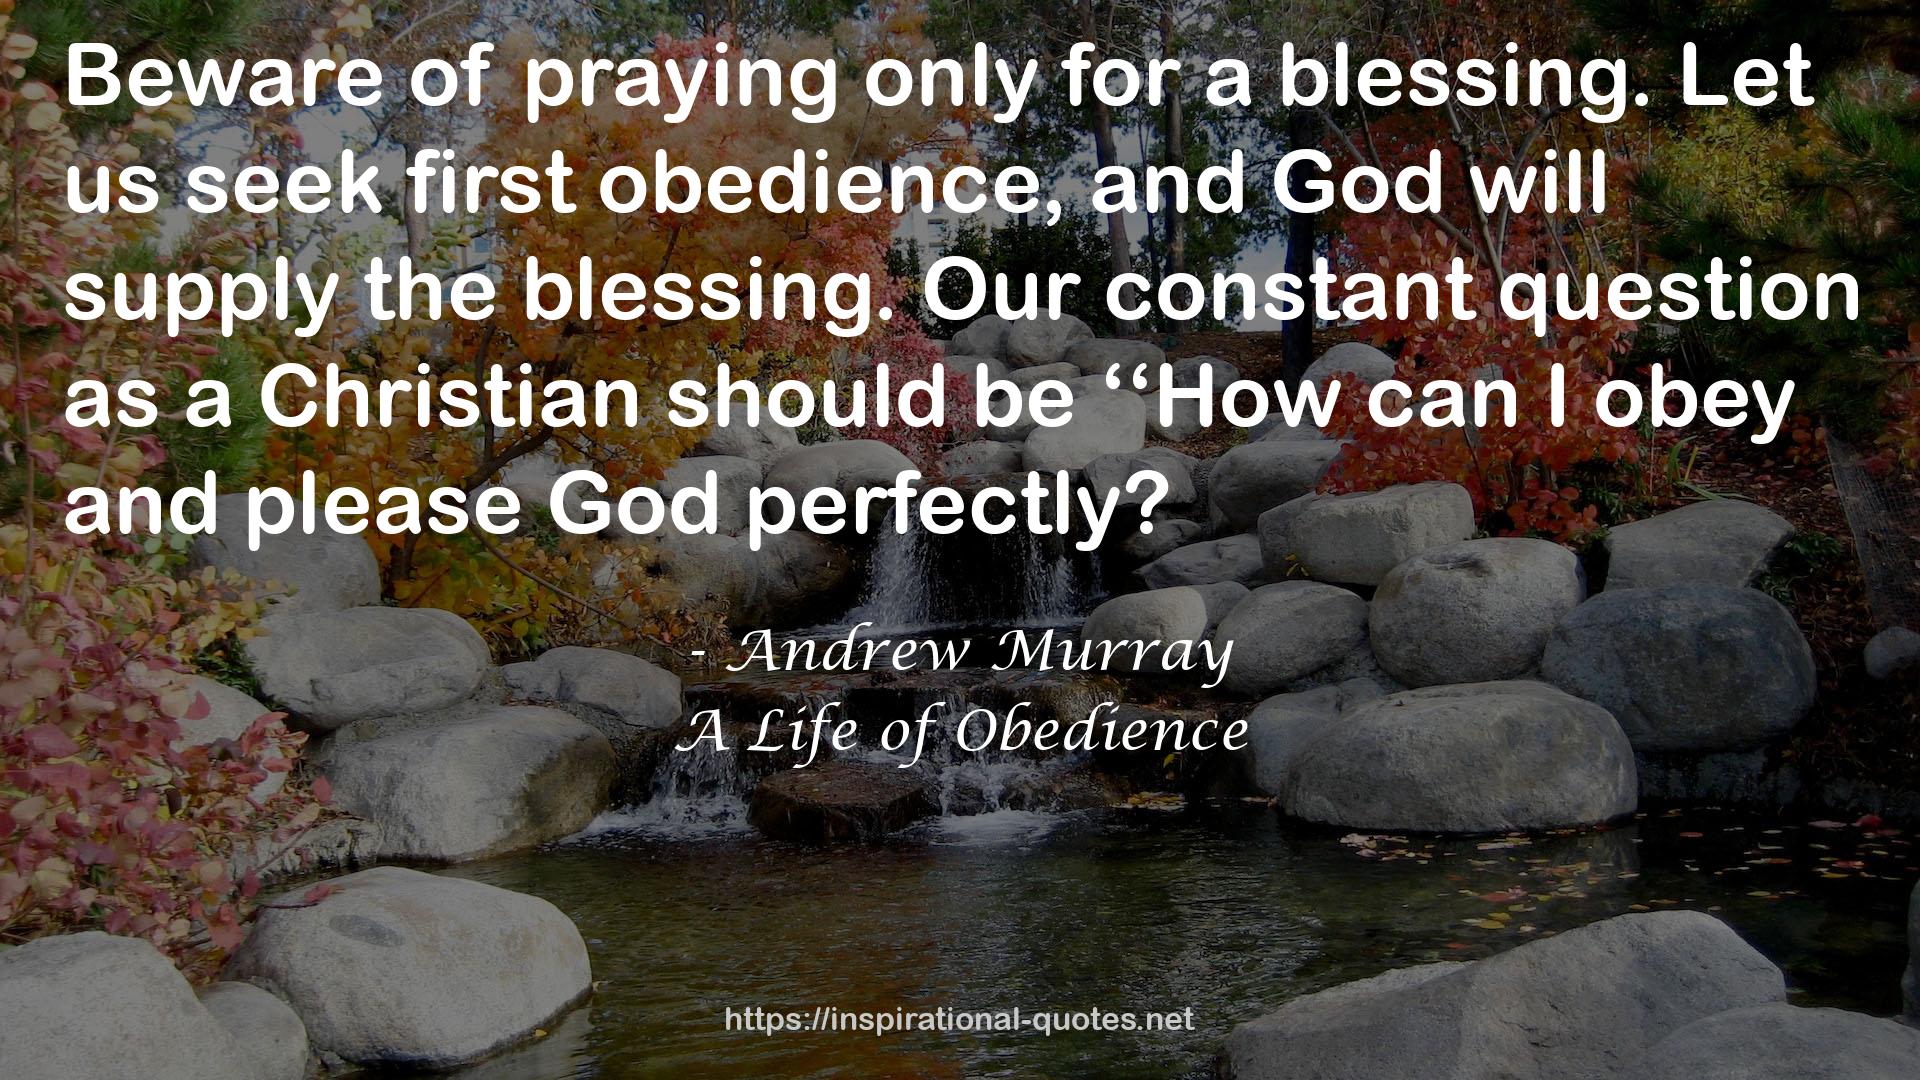 A Life of Obedience QUOTES